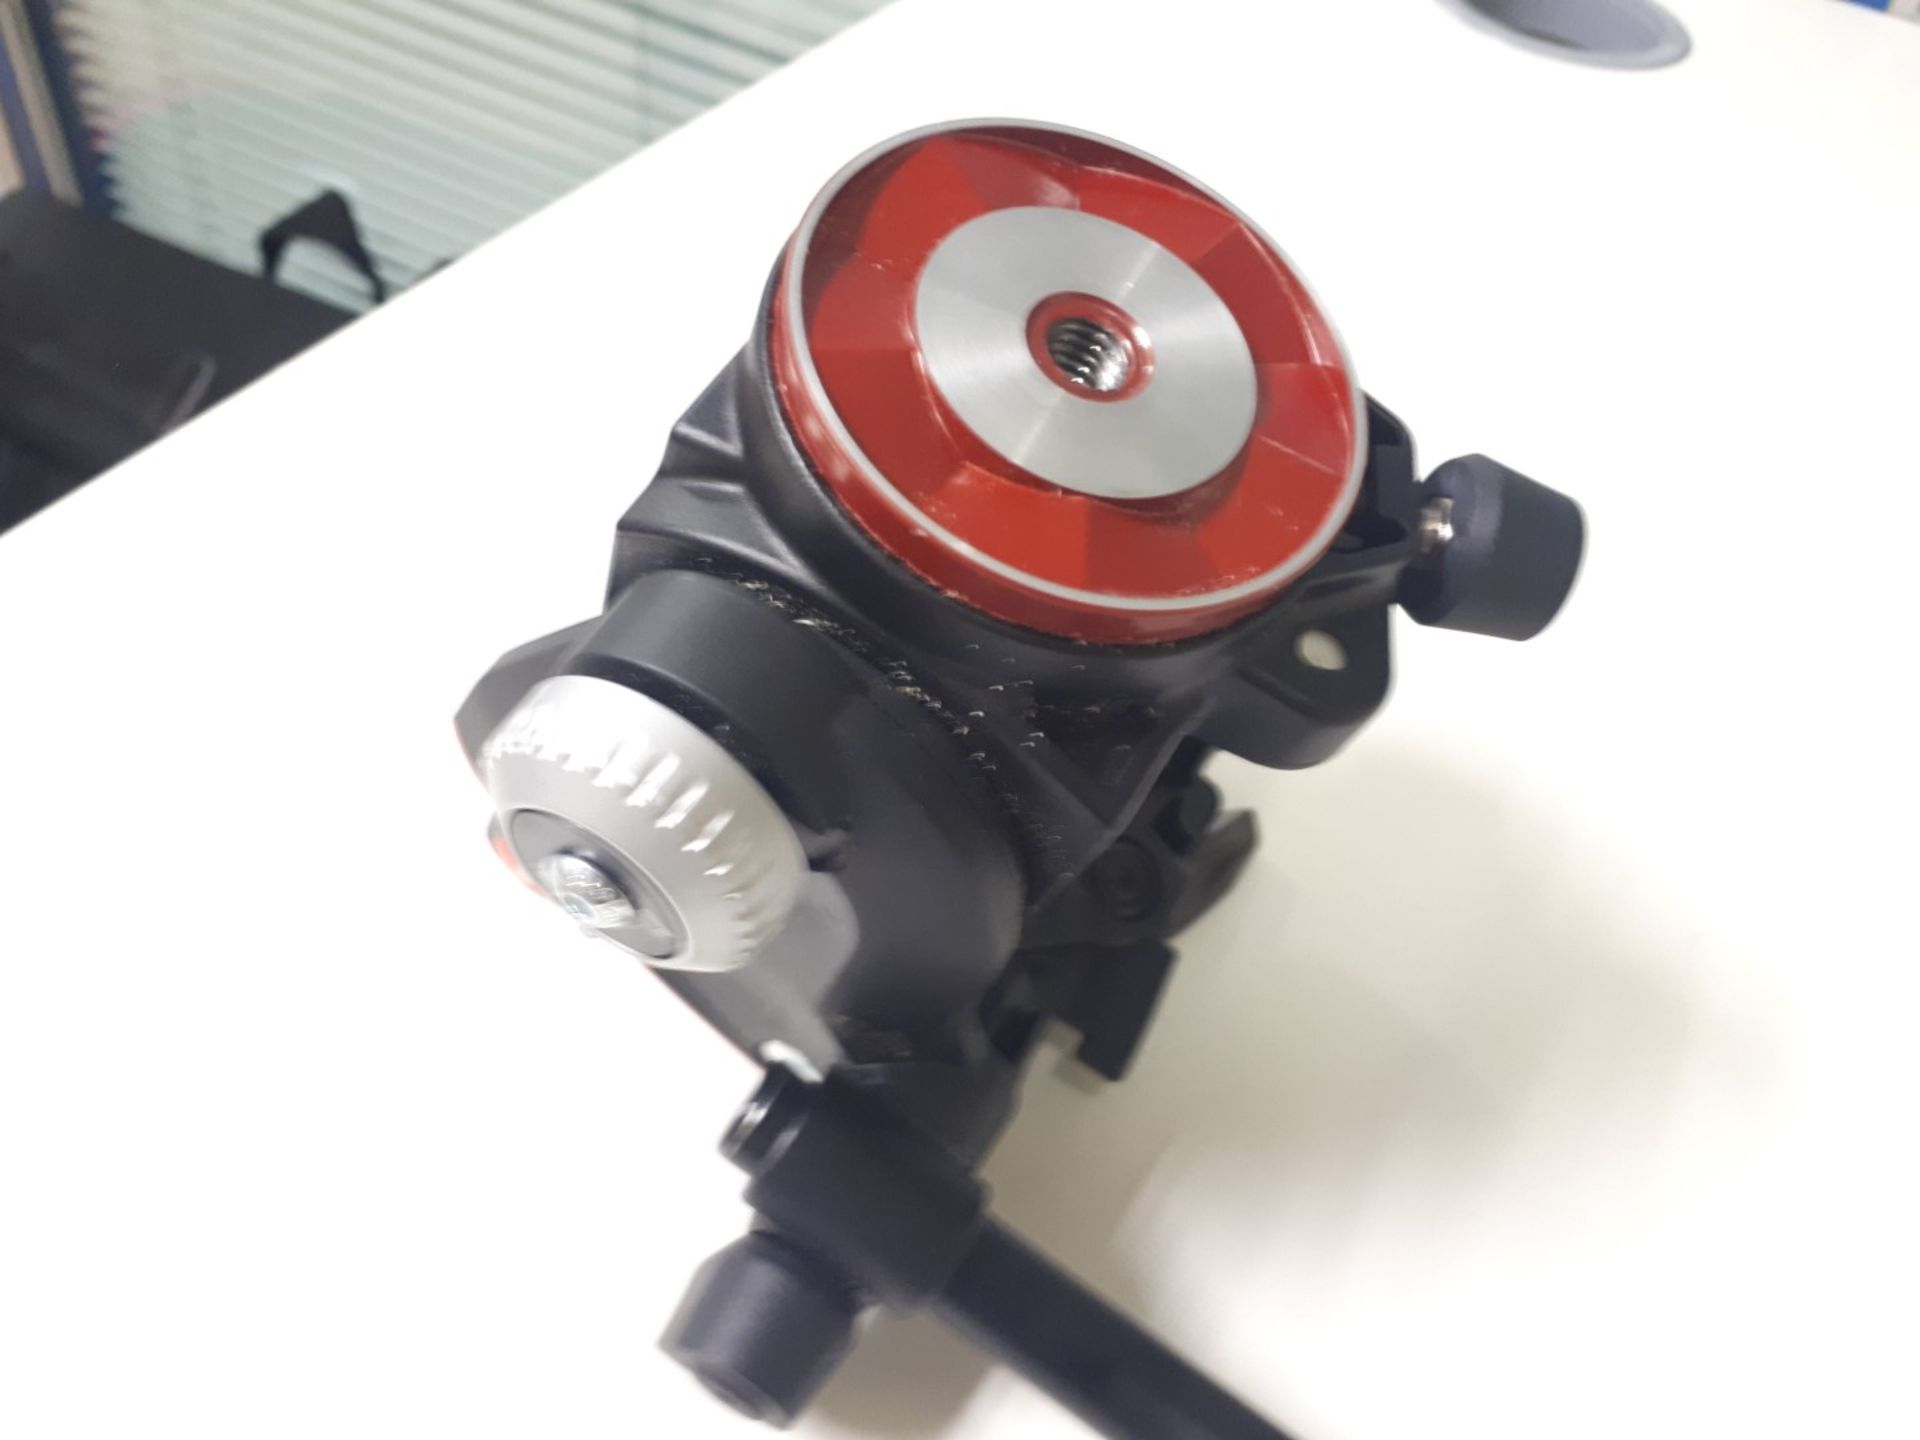 Manfrotto Video Head - Image 2 of 2